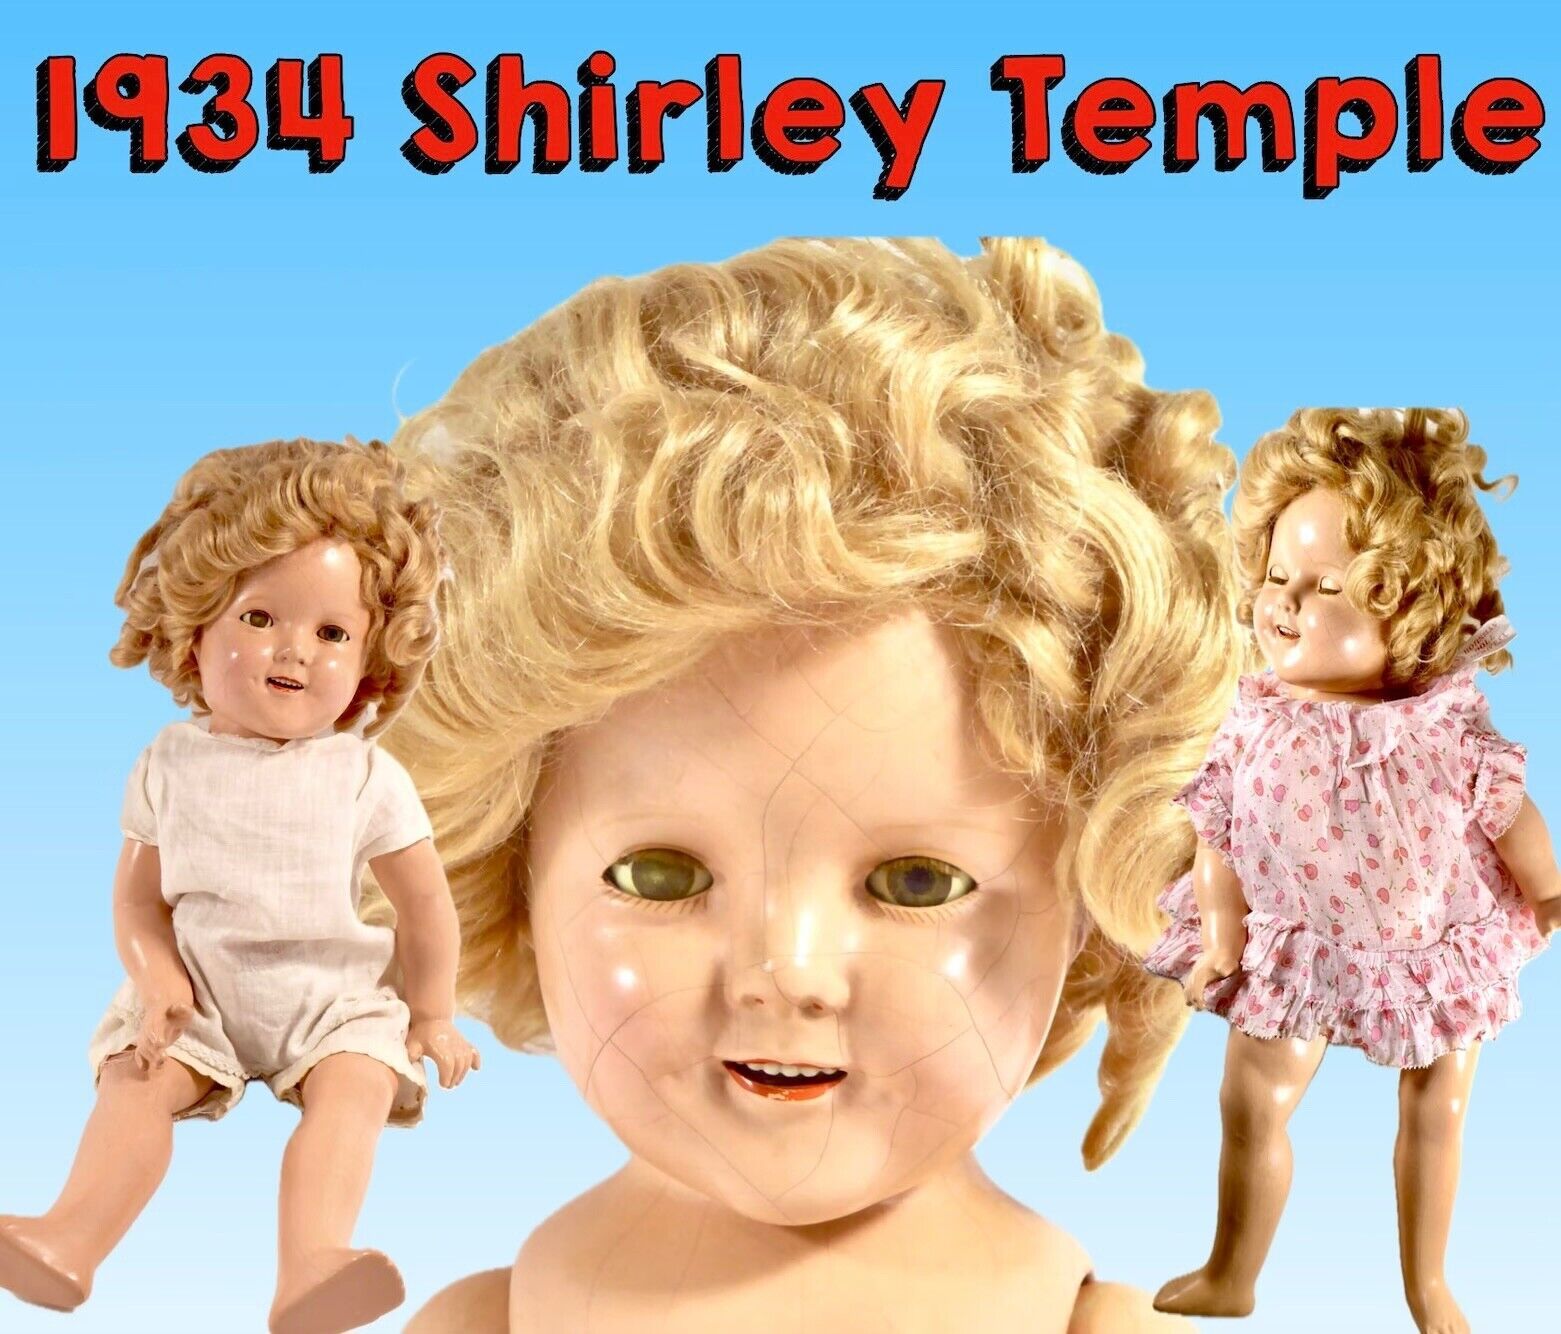 25% PRICE DROP:1934 Ideal Shirley Temple Doll, 18" Composition, Clothing & Shoes - $107.10